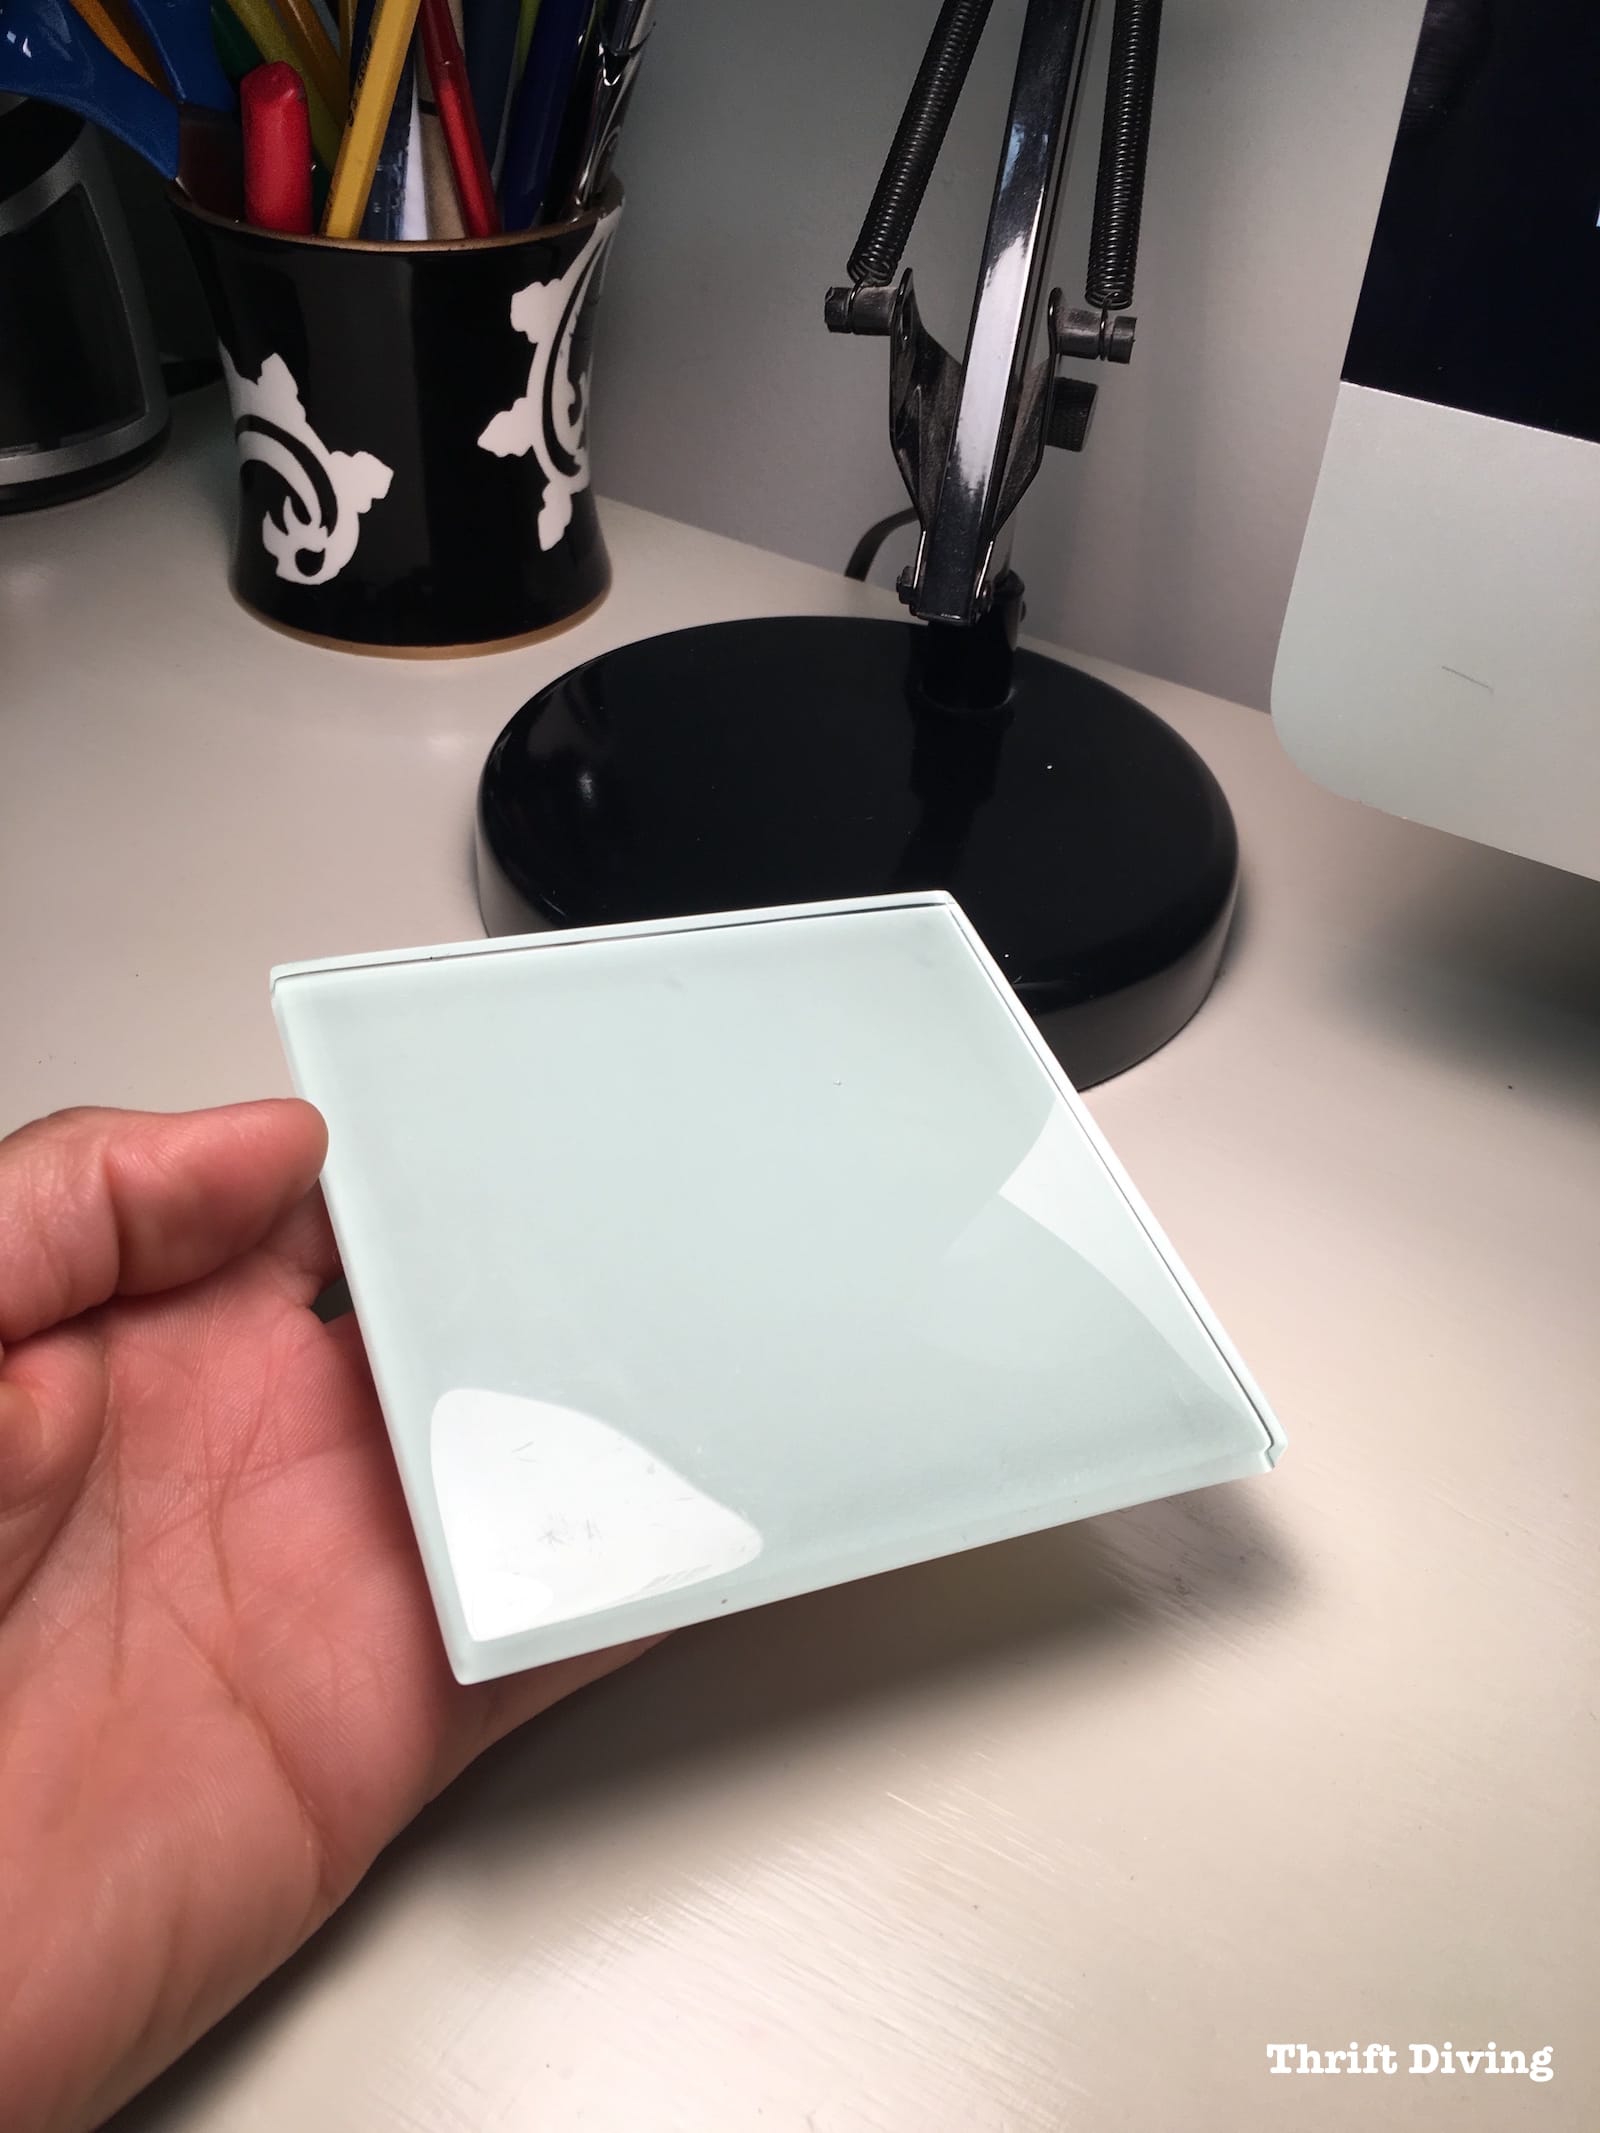 Refresh Your Desk - Use a glass tile from the hardware store as a DIY drink coaster 1